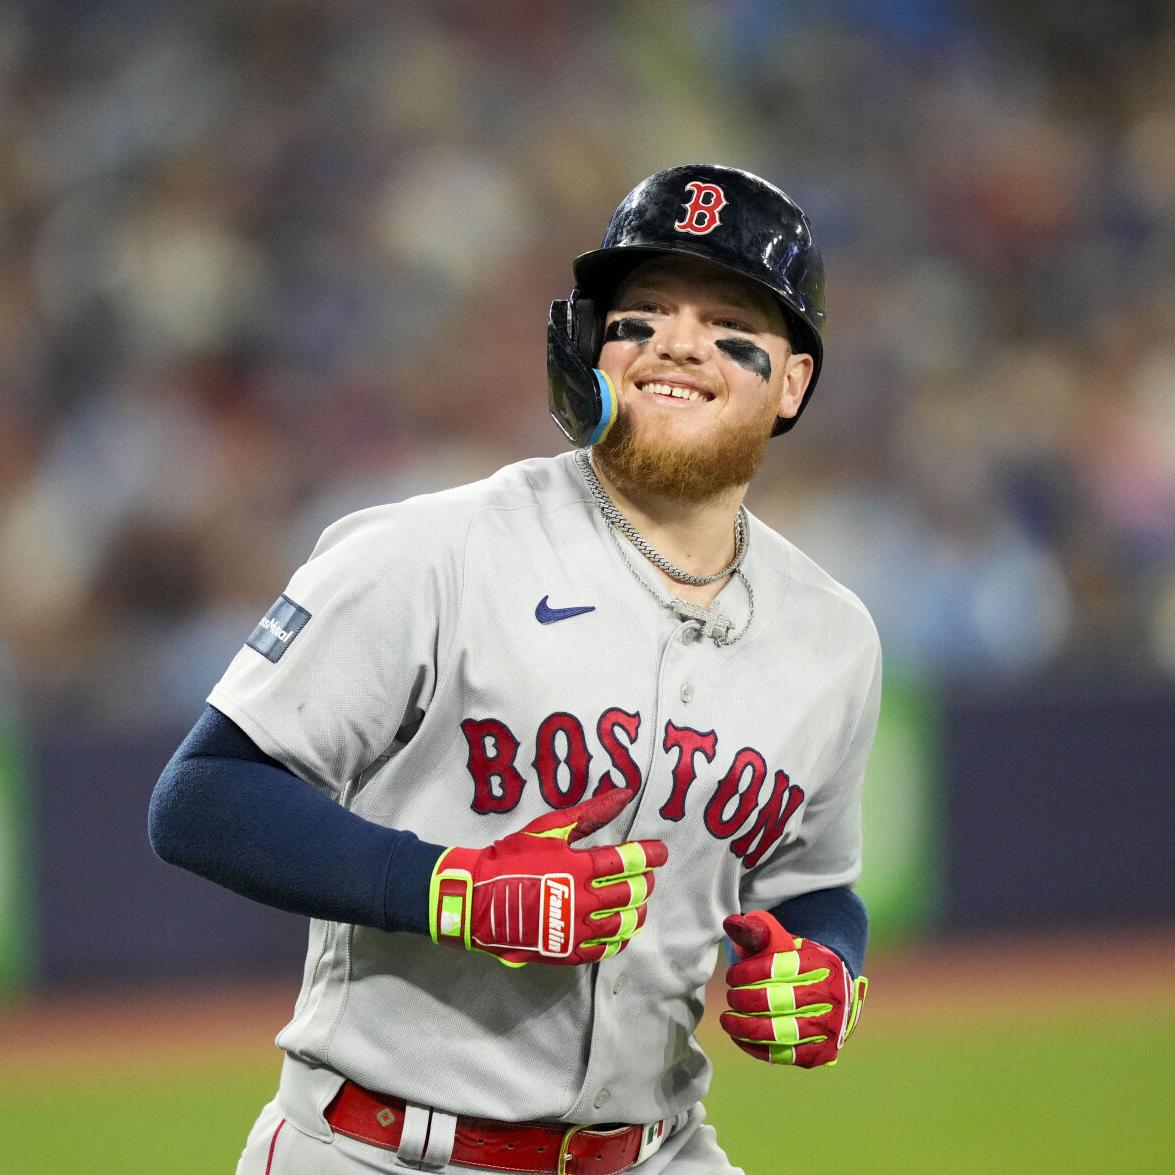 Justin Turner thanks Red Sox fans for support after scary injury